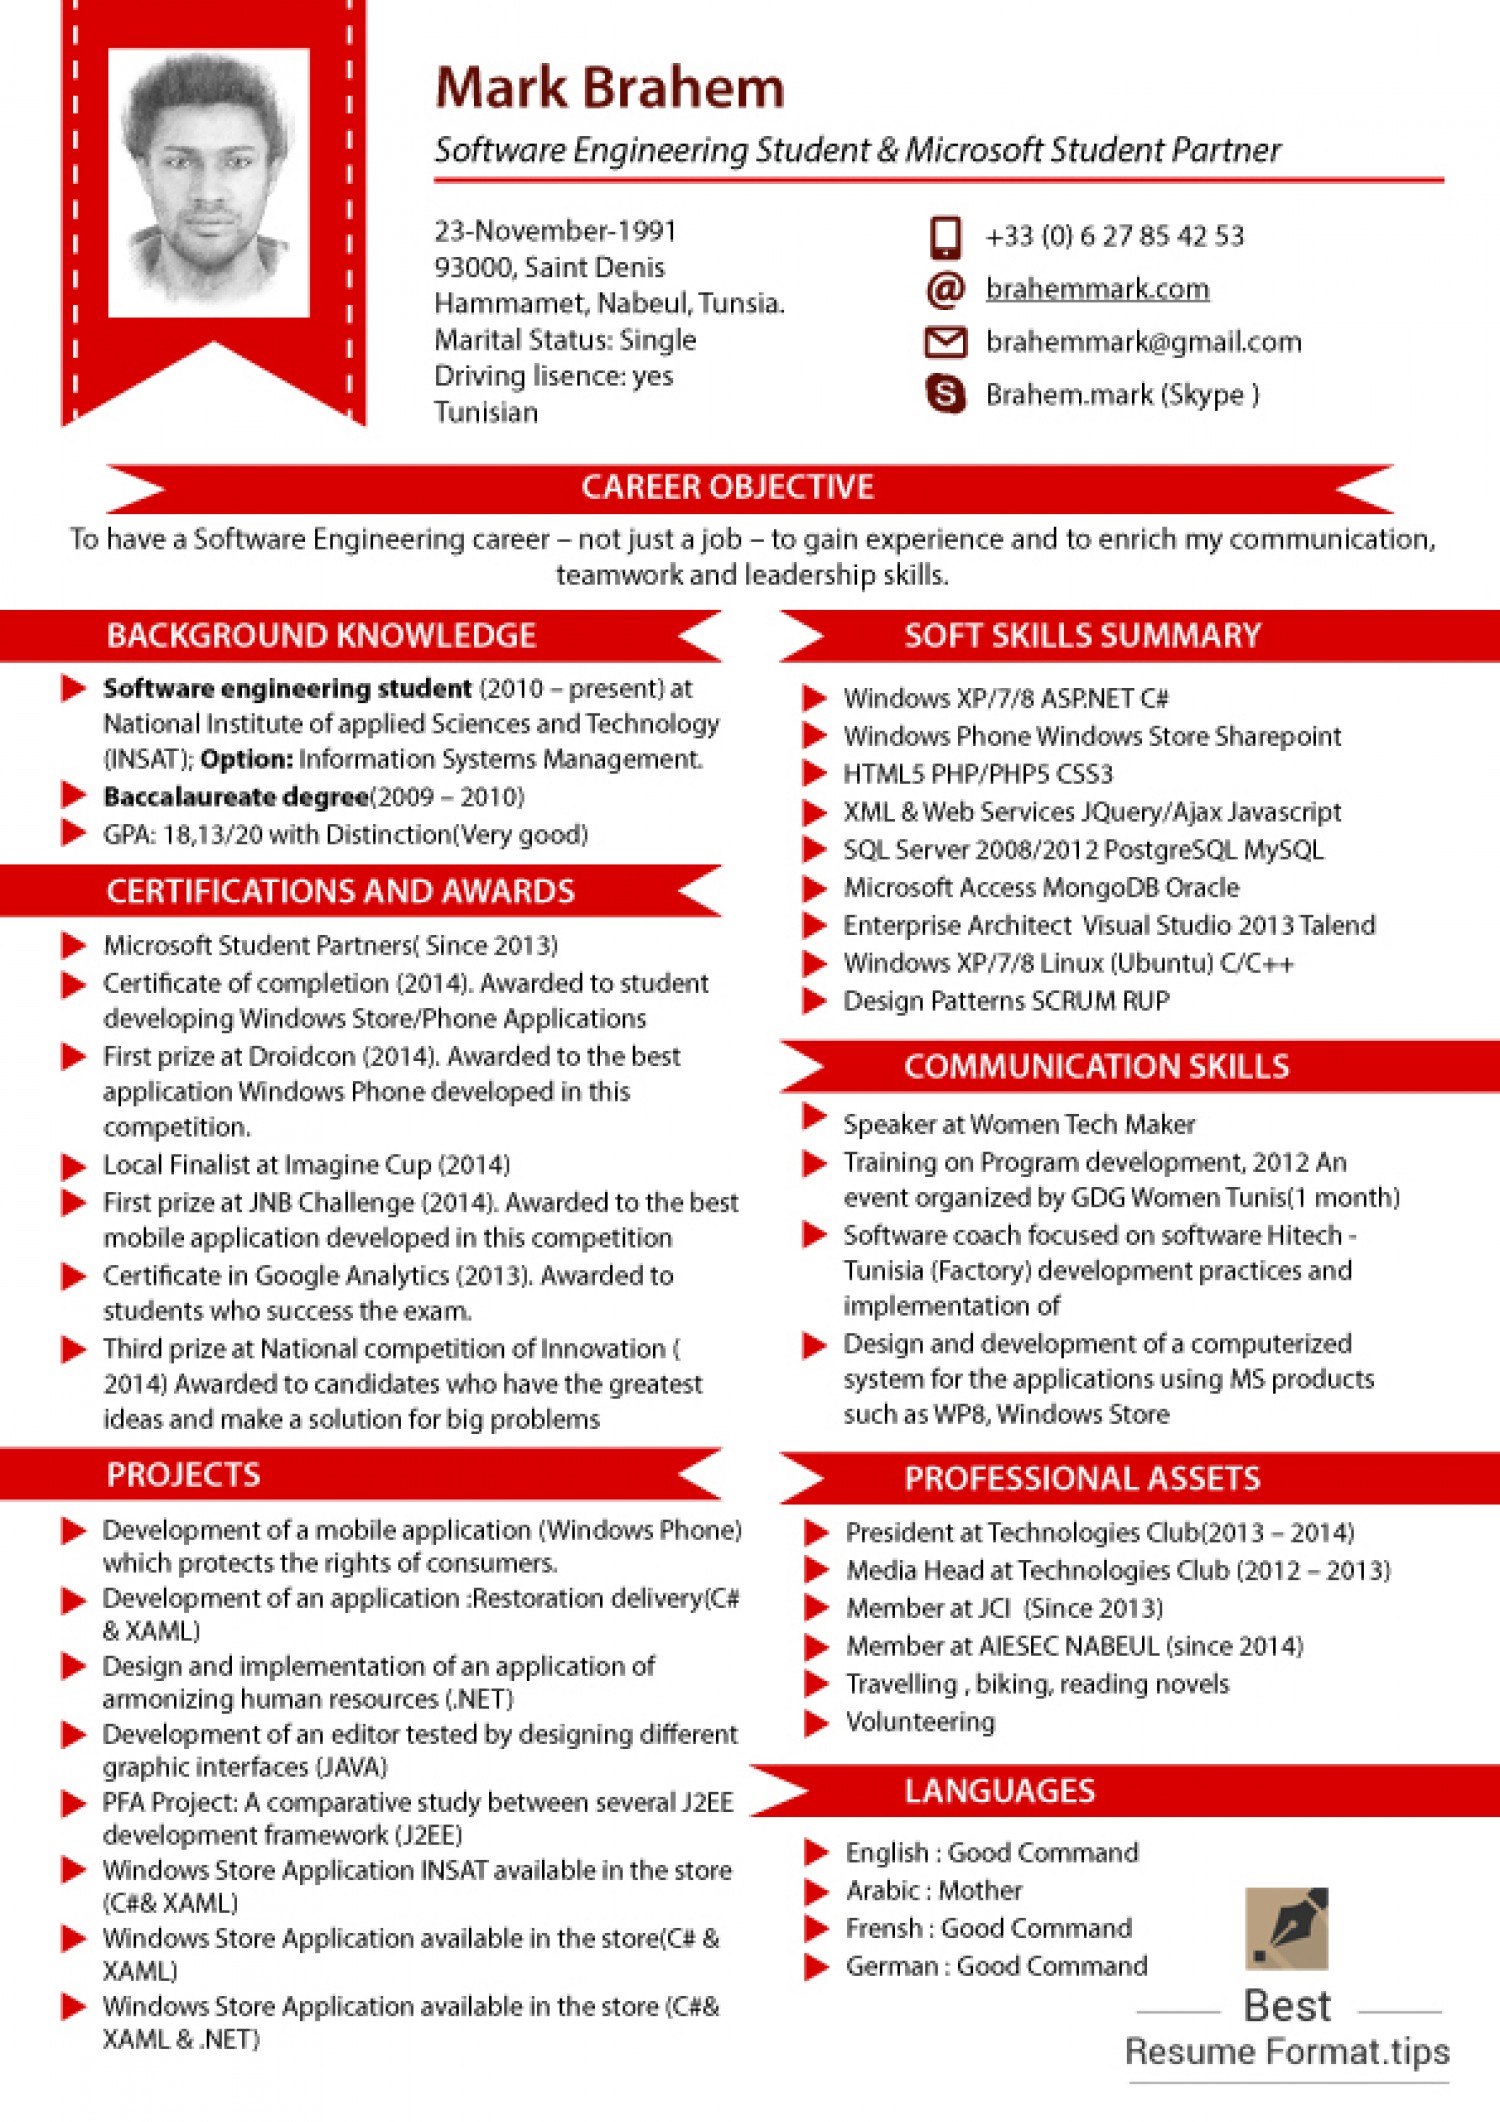 Resume format 2016 12 free to download word templates